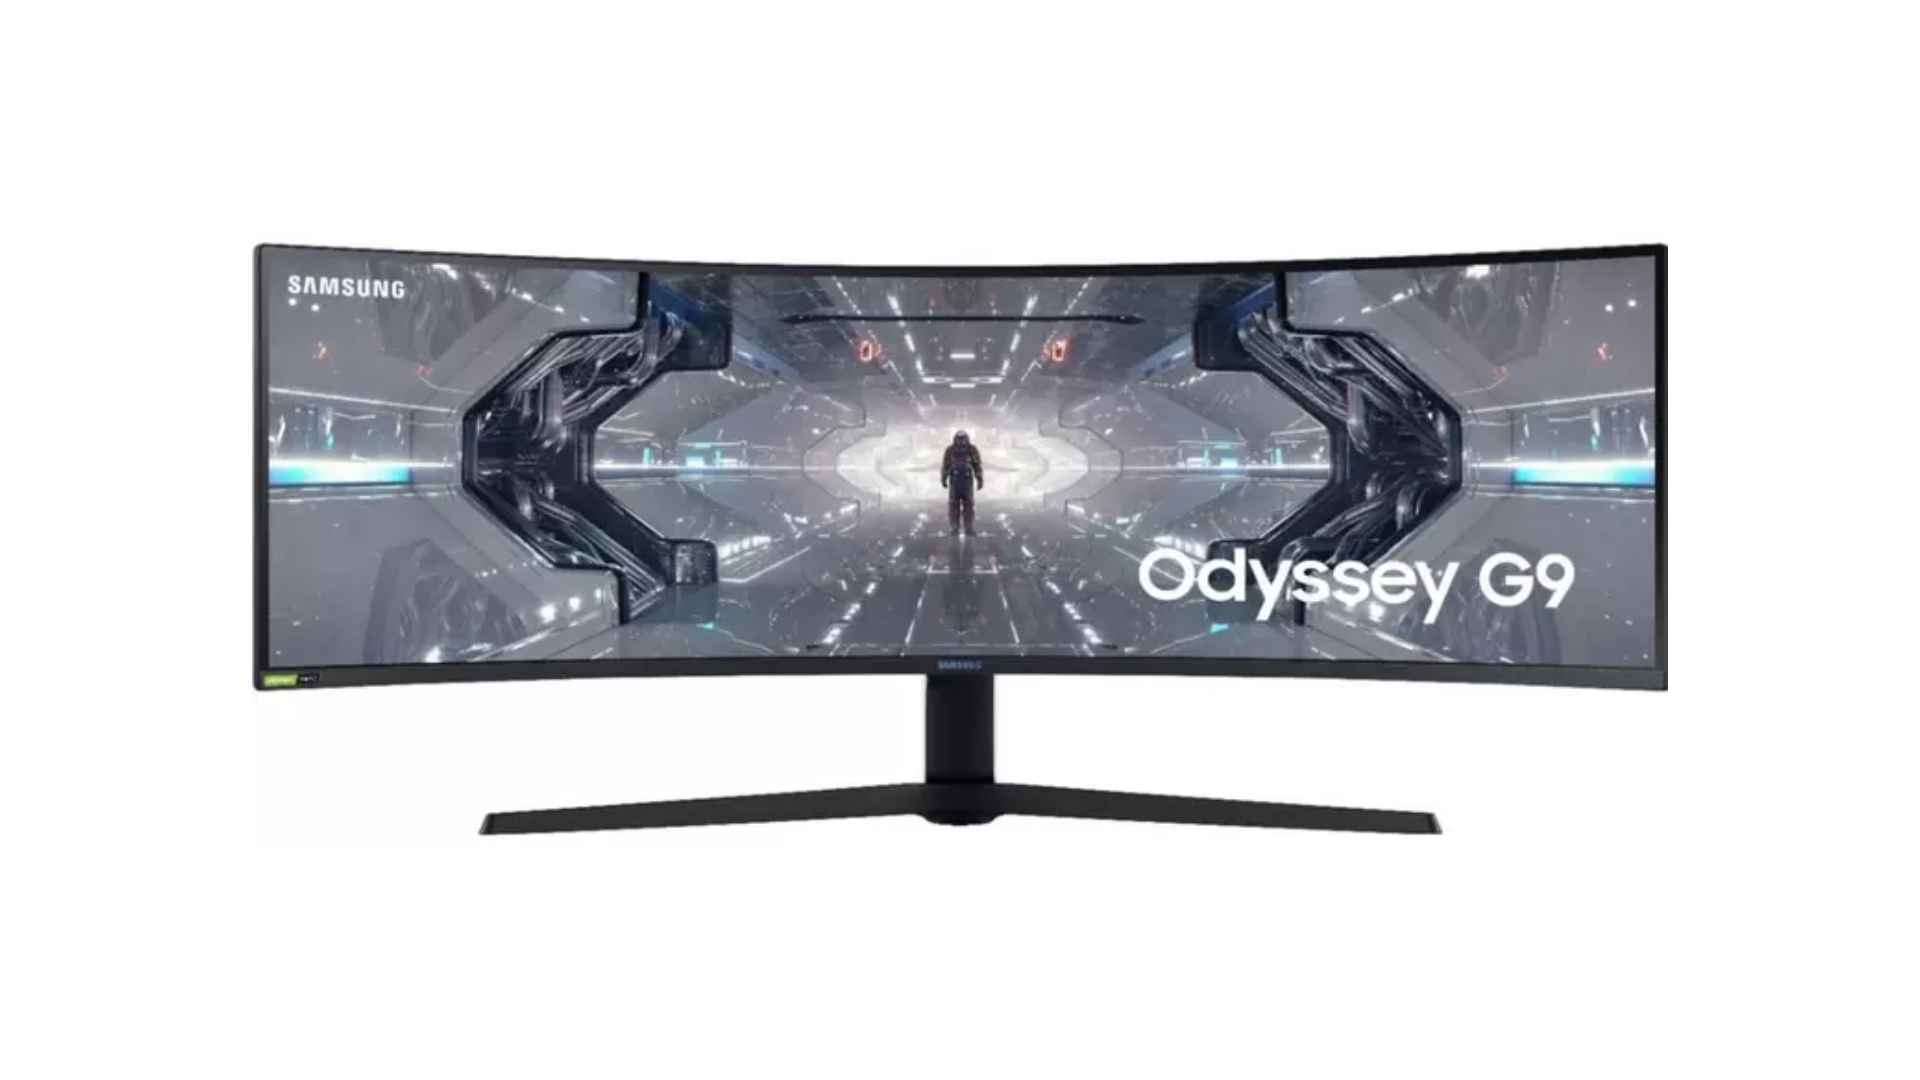 Curved gaming monitor Samsung Odyssey G9 on a white background.